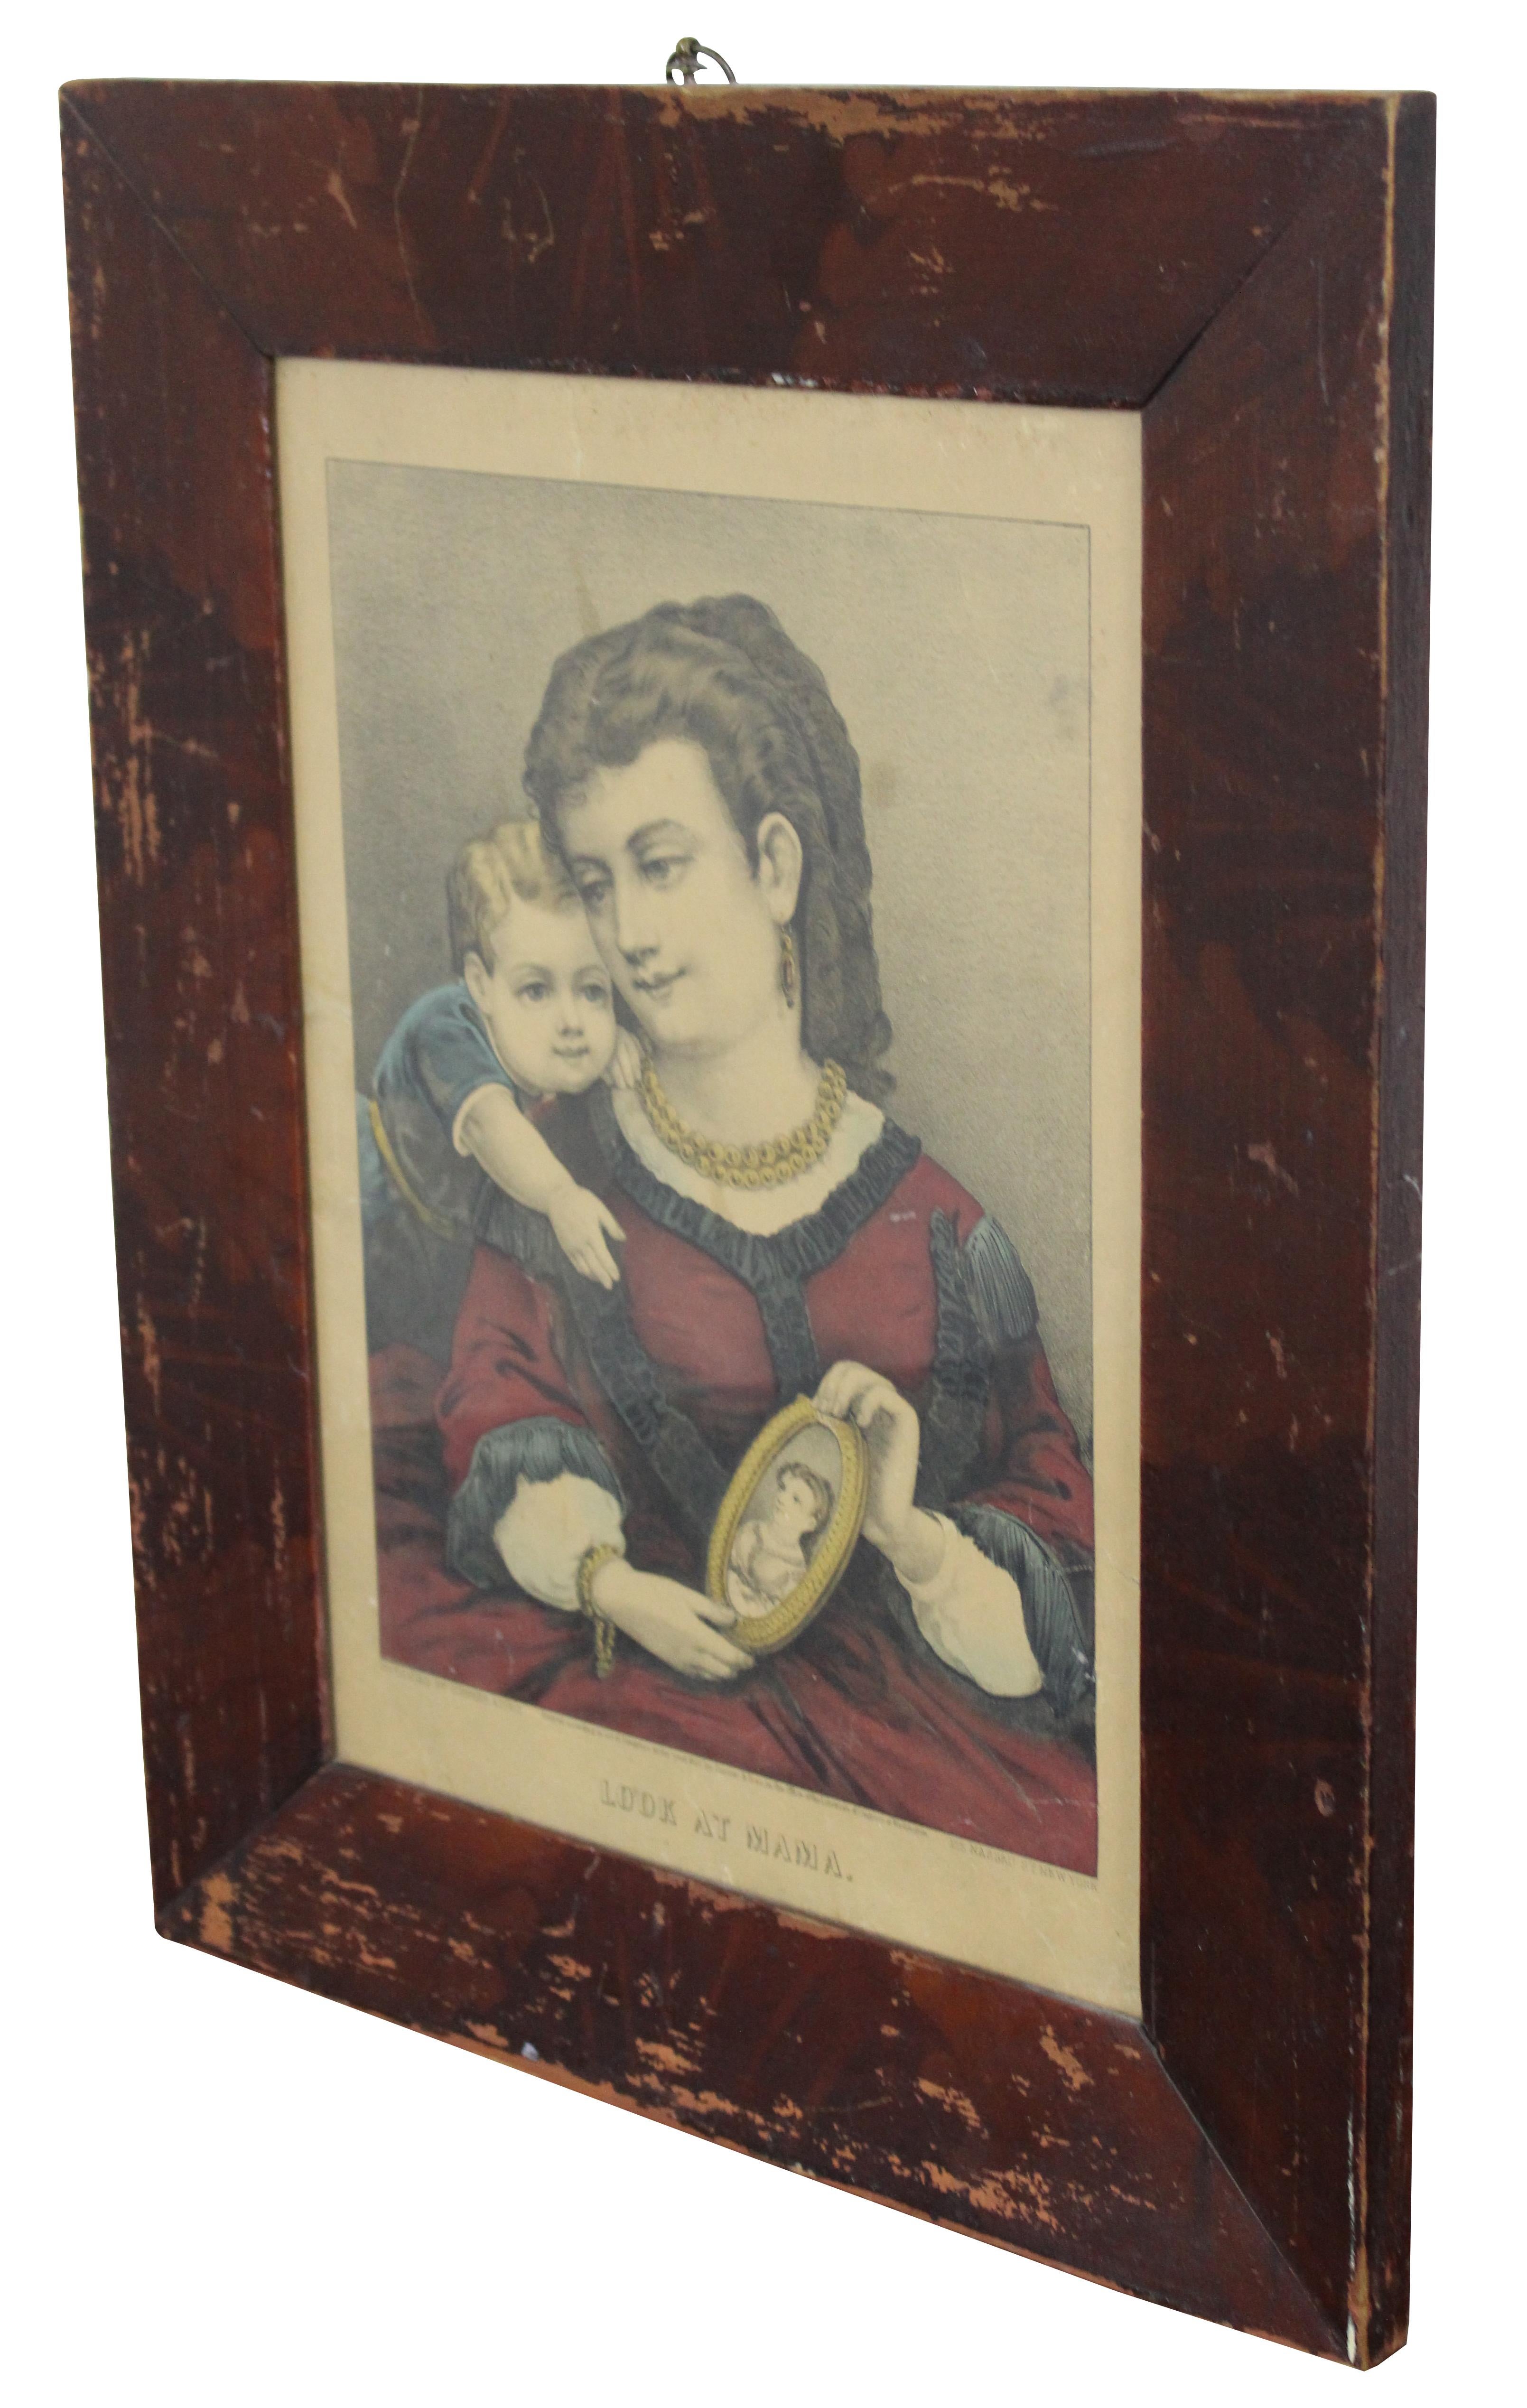 Circa 1870’s antique Currier & Ives colored lithograph print titled “Look at Mama,” featuring a mother showing a portrait of herself to an infant at her shoulder.

Measures: 14.75” x 0.75” x 18.5” / Sans Frame - 9.75” x 13.75” (Width x Depth x